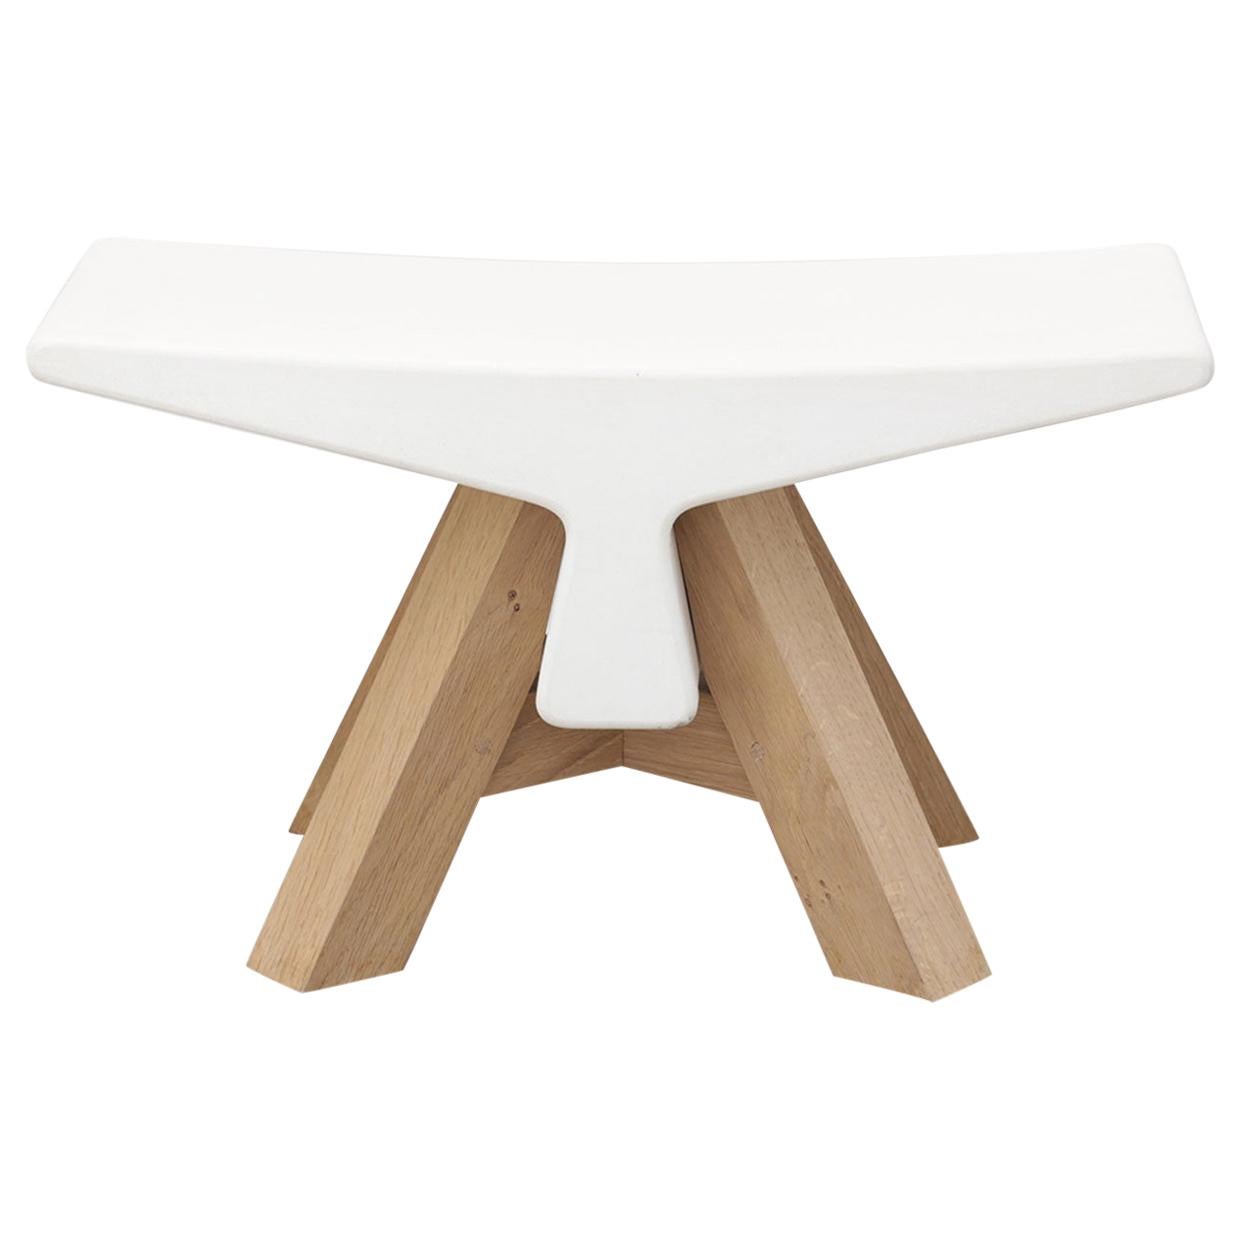 Bone Ductal, Stool in Oak and white or grey Concrete, YMER&MALTA, France For Sale